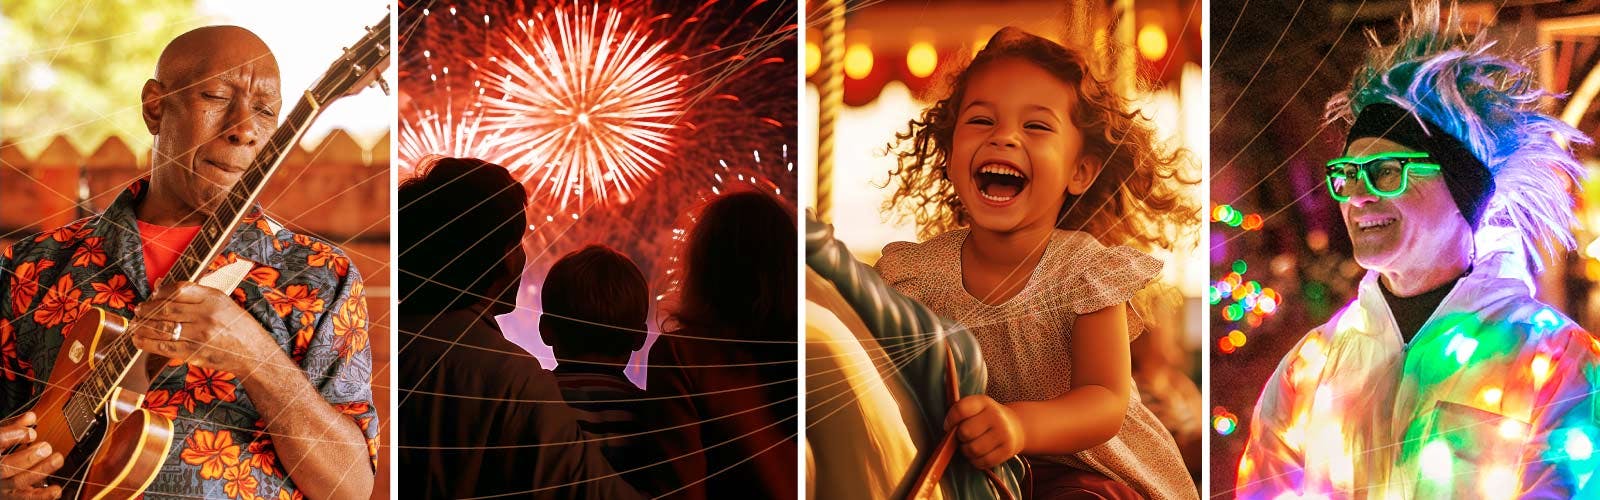 Collage image of playing the guitar, people enjoying fireworks, a child on a merry-go-round, and a person wearing glow gear.